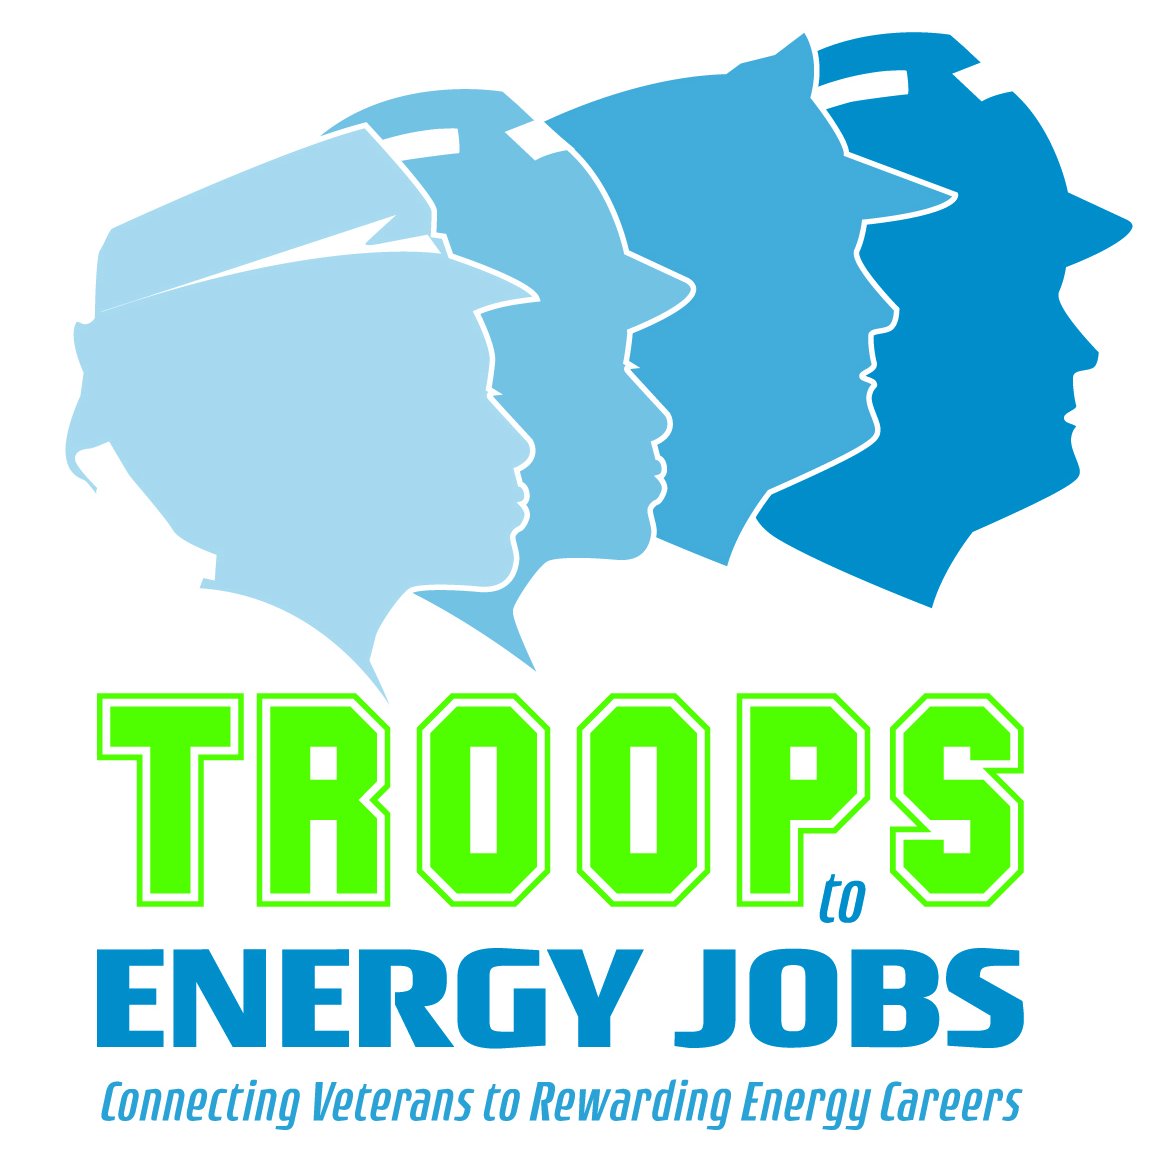 Troops to Energy Jobs is designed to help veterans make a successful transition to a rewarding career in the energy industry.